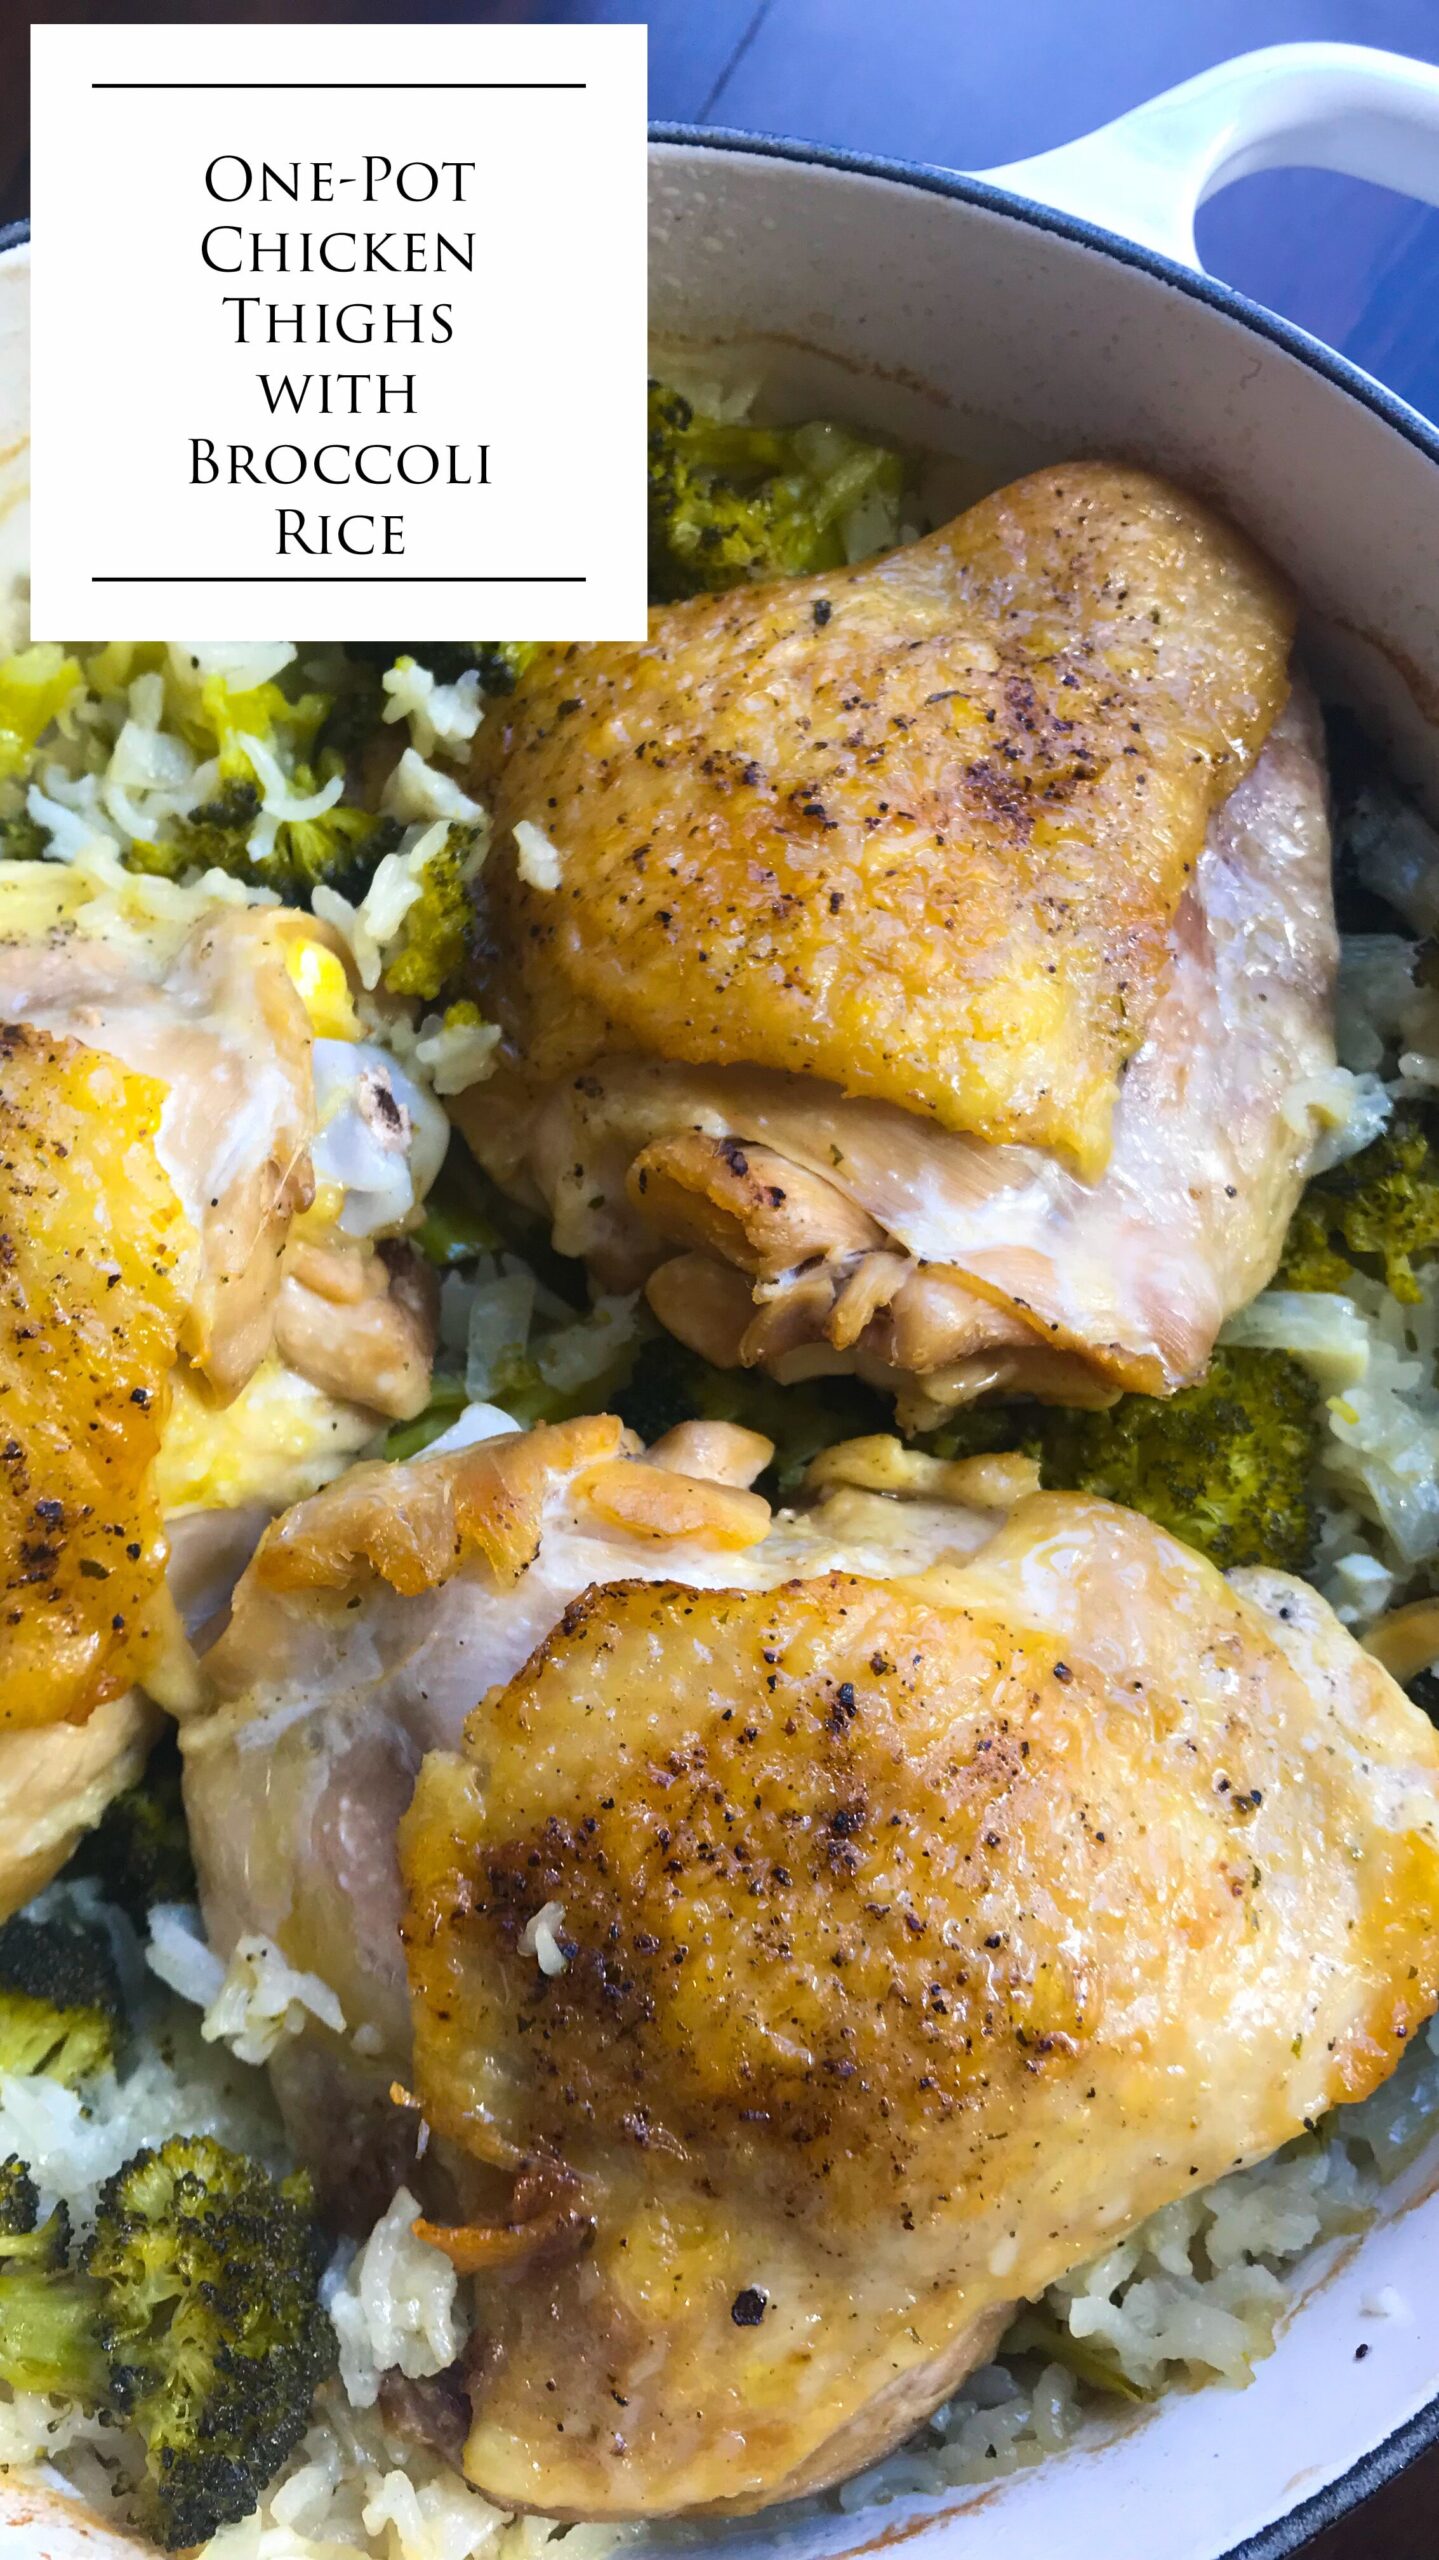 One-Pot Chicken Thighs with Broccoli Rice. A simple one-pot weeknight meal that packs big flavor. A complete dinner on your table with just one dish to clean up. 